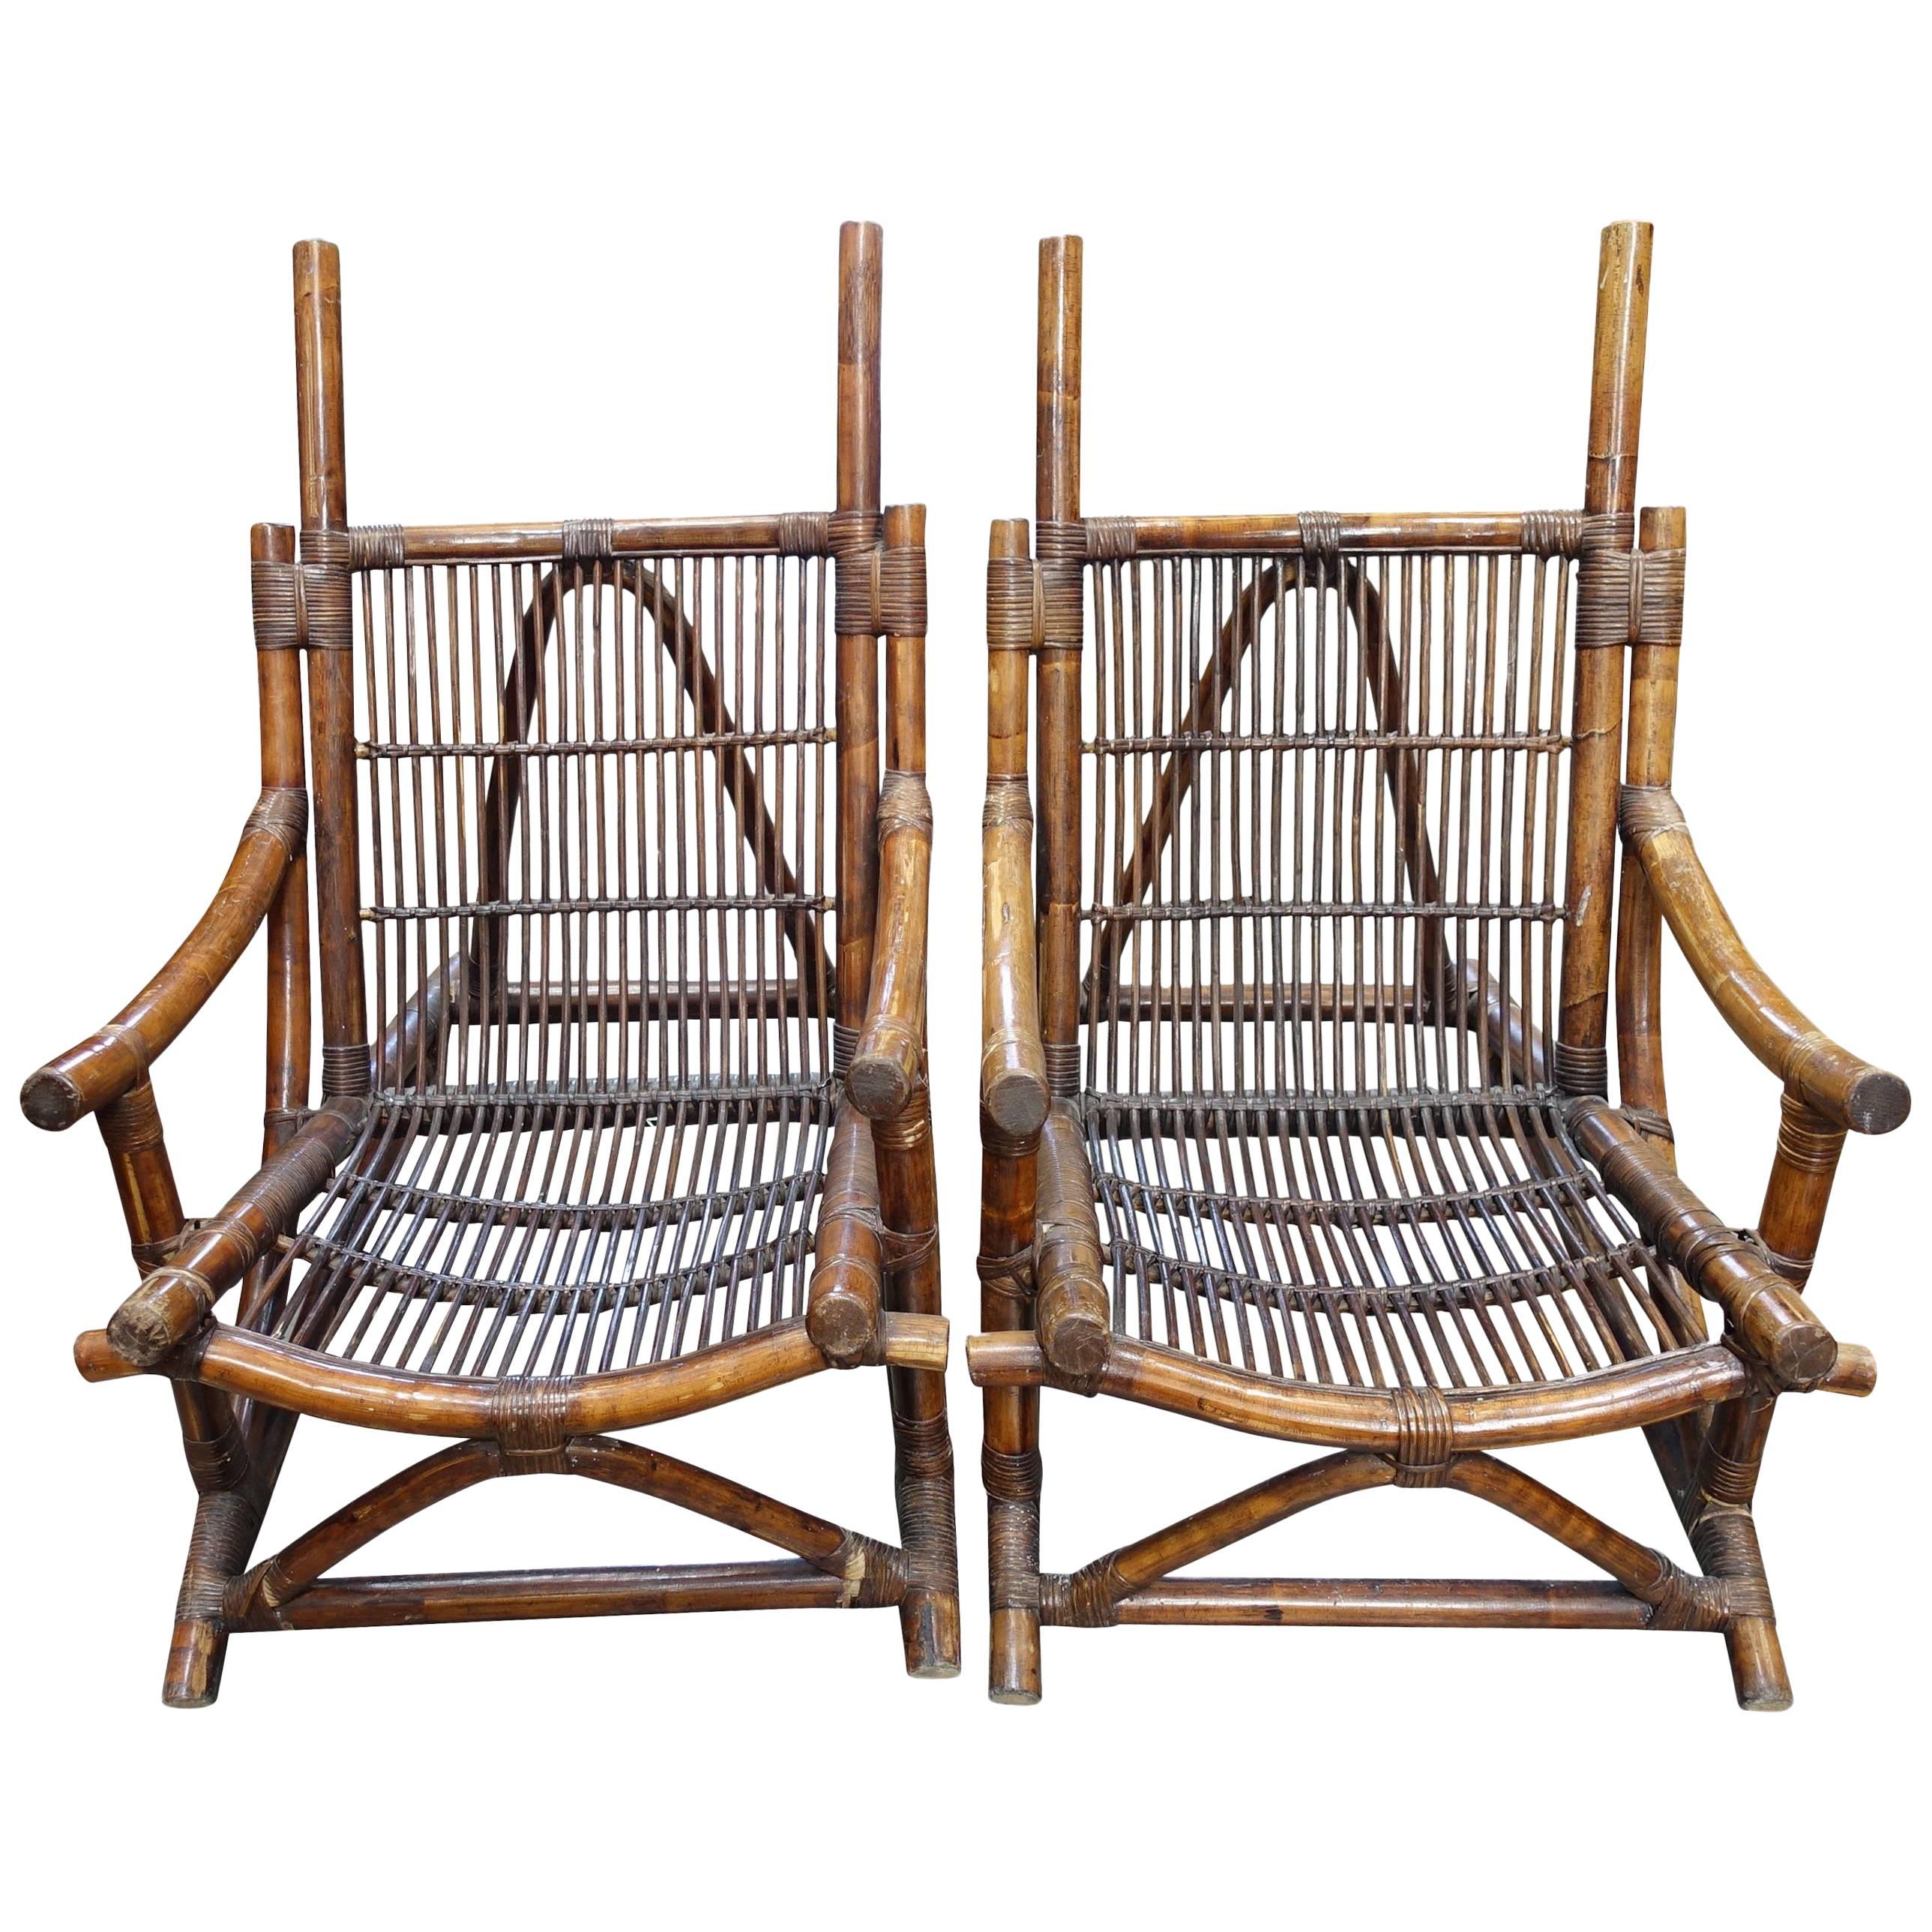 Pair of Bamboo Side Chairs, France, 1940s